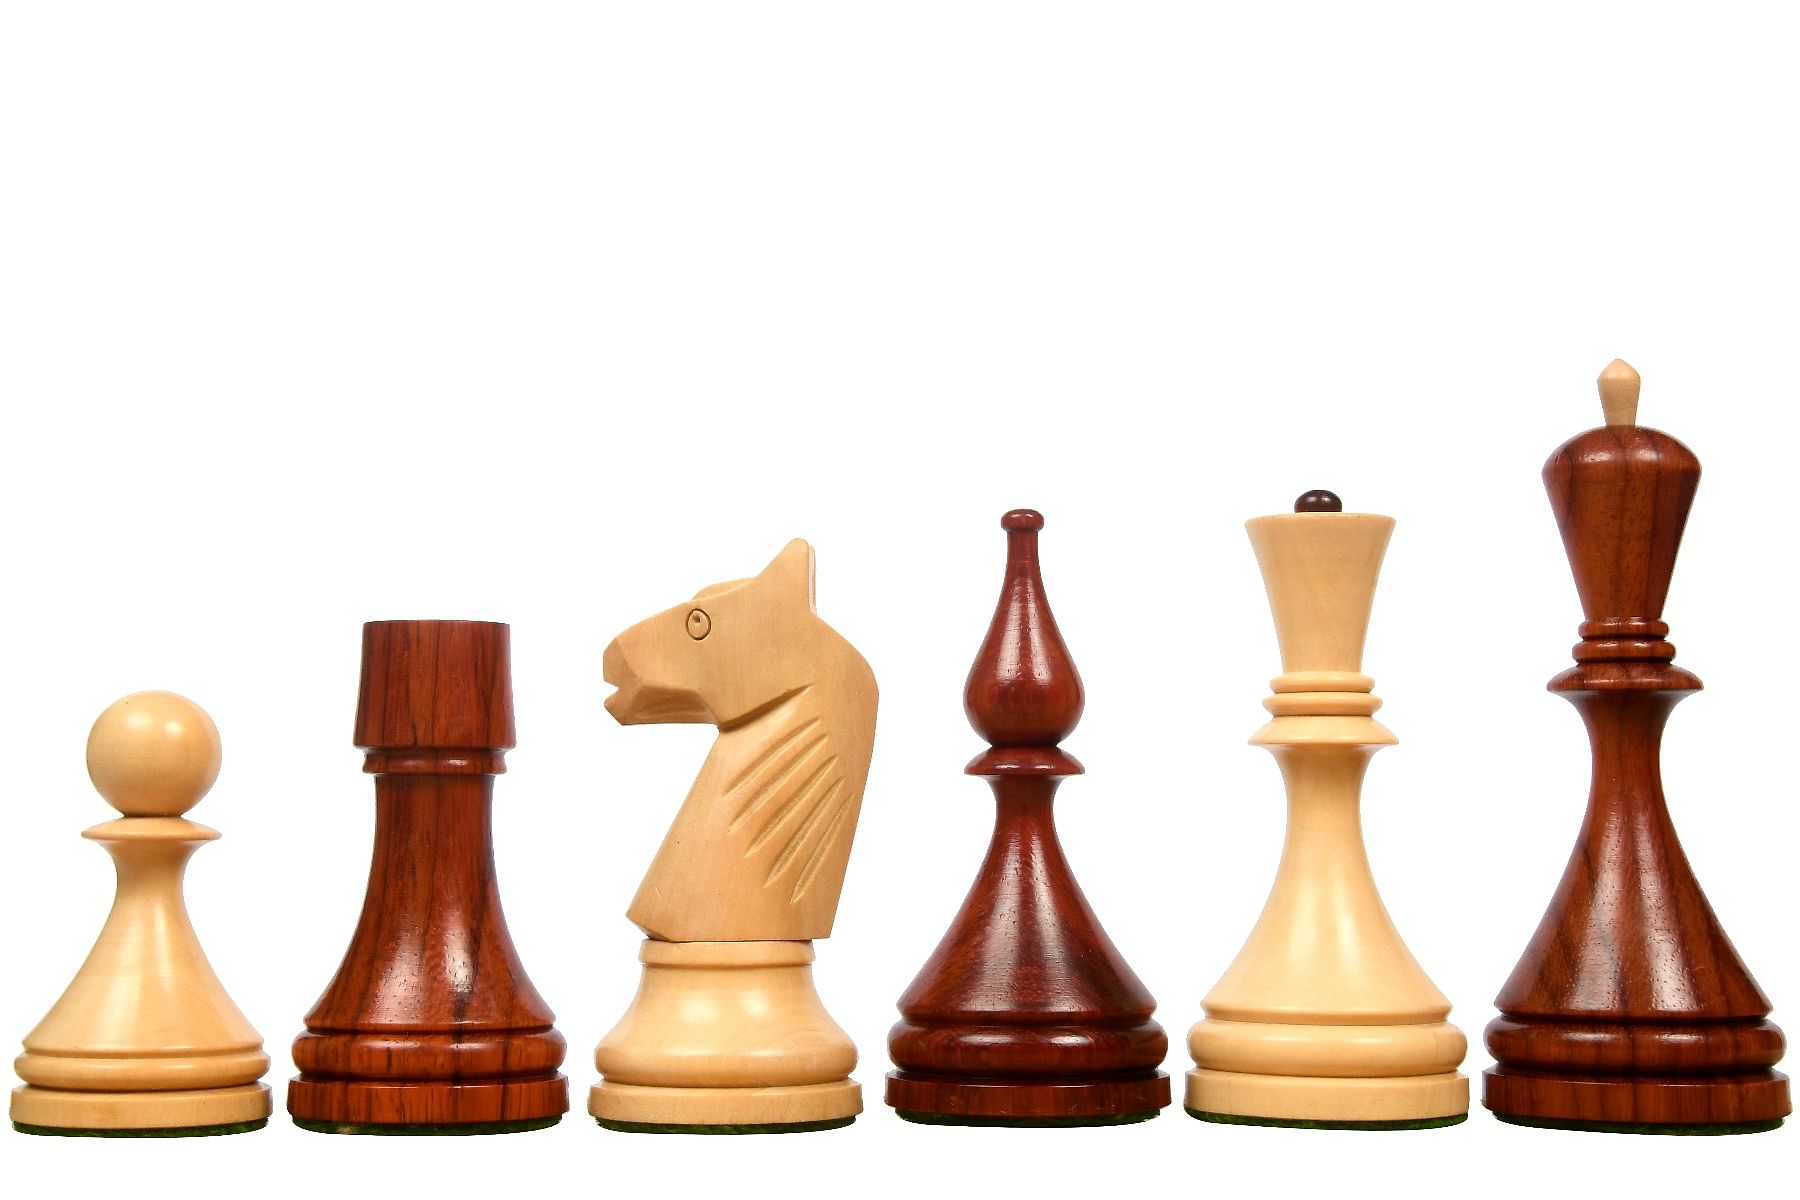 Reproduced 1961 Soviet Championship Baku Chess Pieces in Bud Rosewood & Boxwood - 4 King